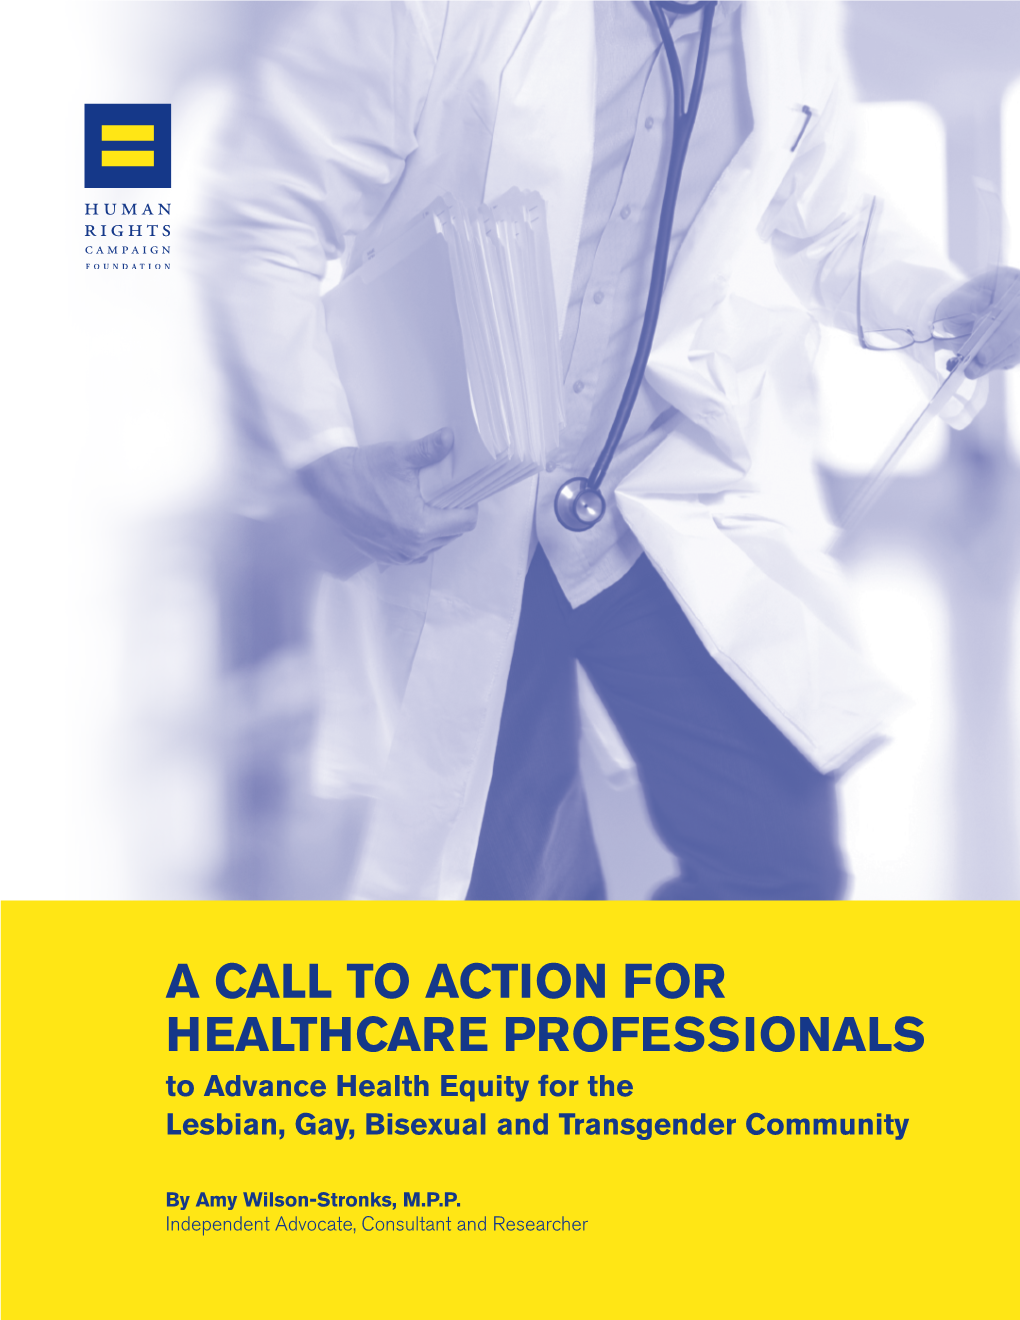 A CALL to ACTION for HEALTHCARE PROFESSIONALS to Advance Health Equity for the Lesbian, Gay, Bisexual and Transgender Community